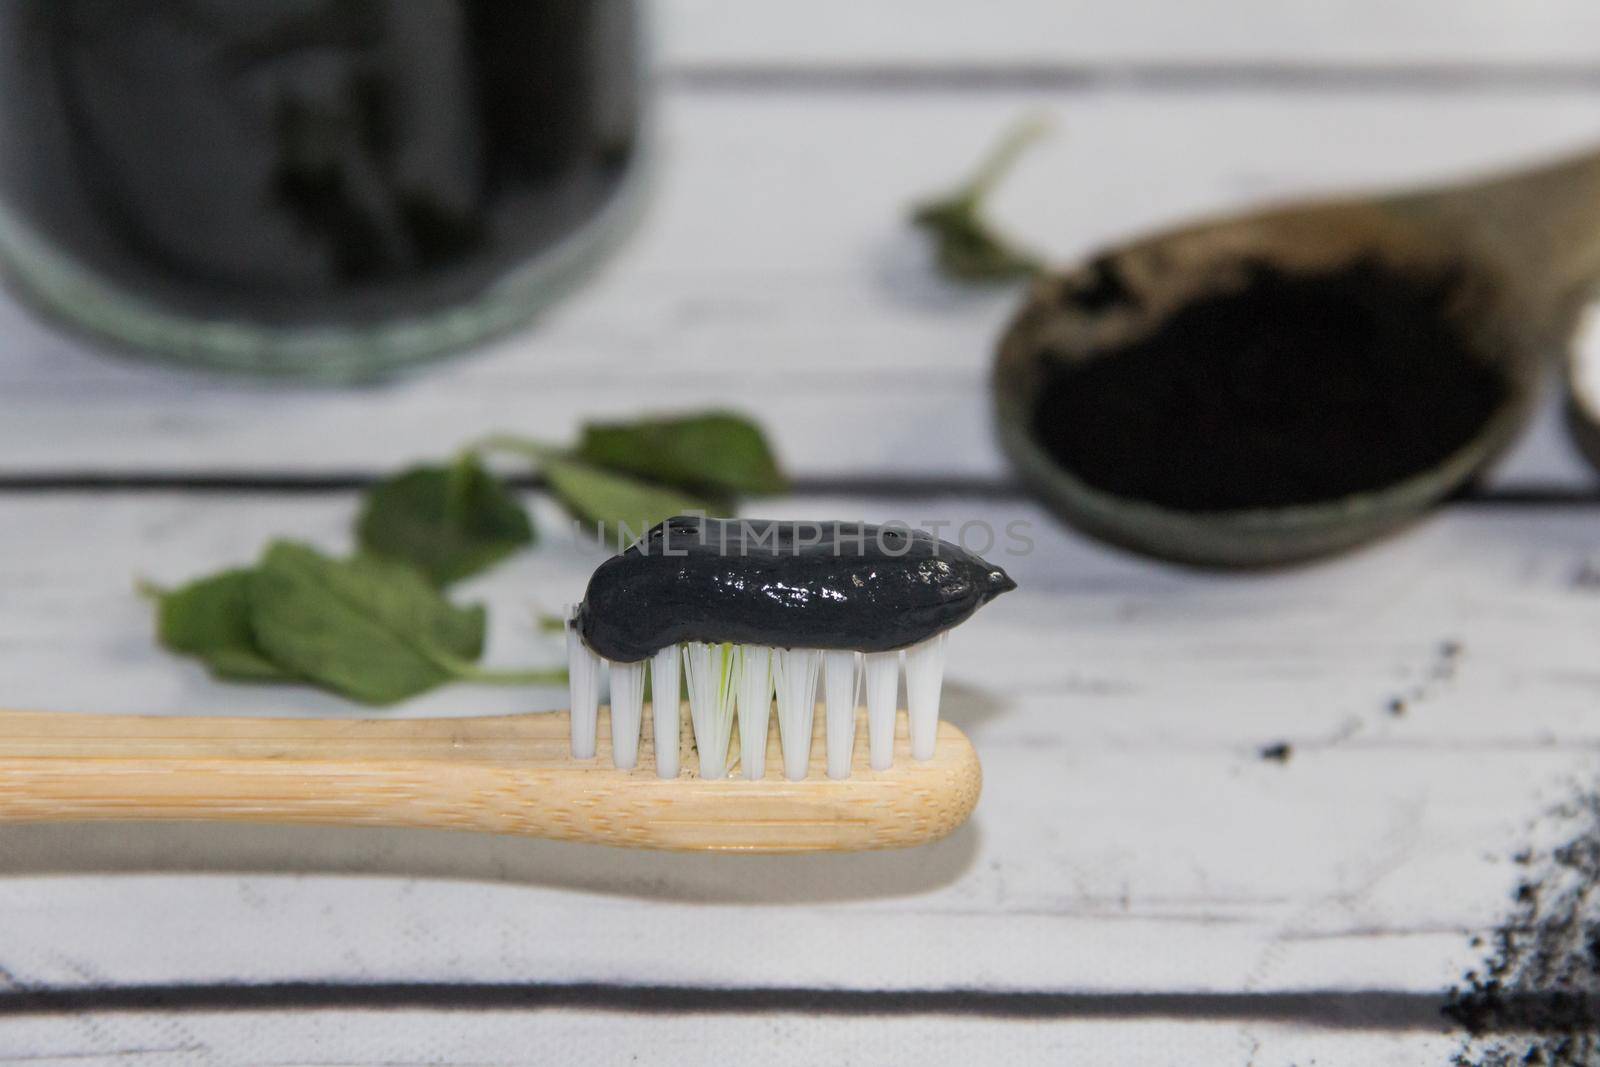 Ingredients for making activated charcoal toothpaste by GabrielaBertolini